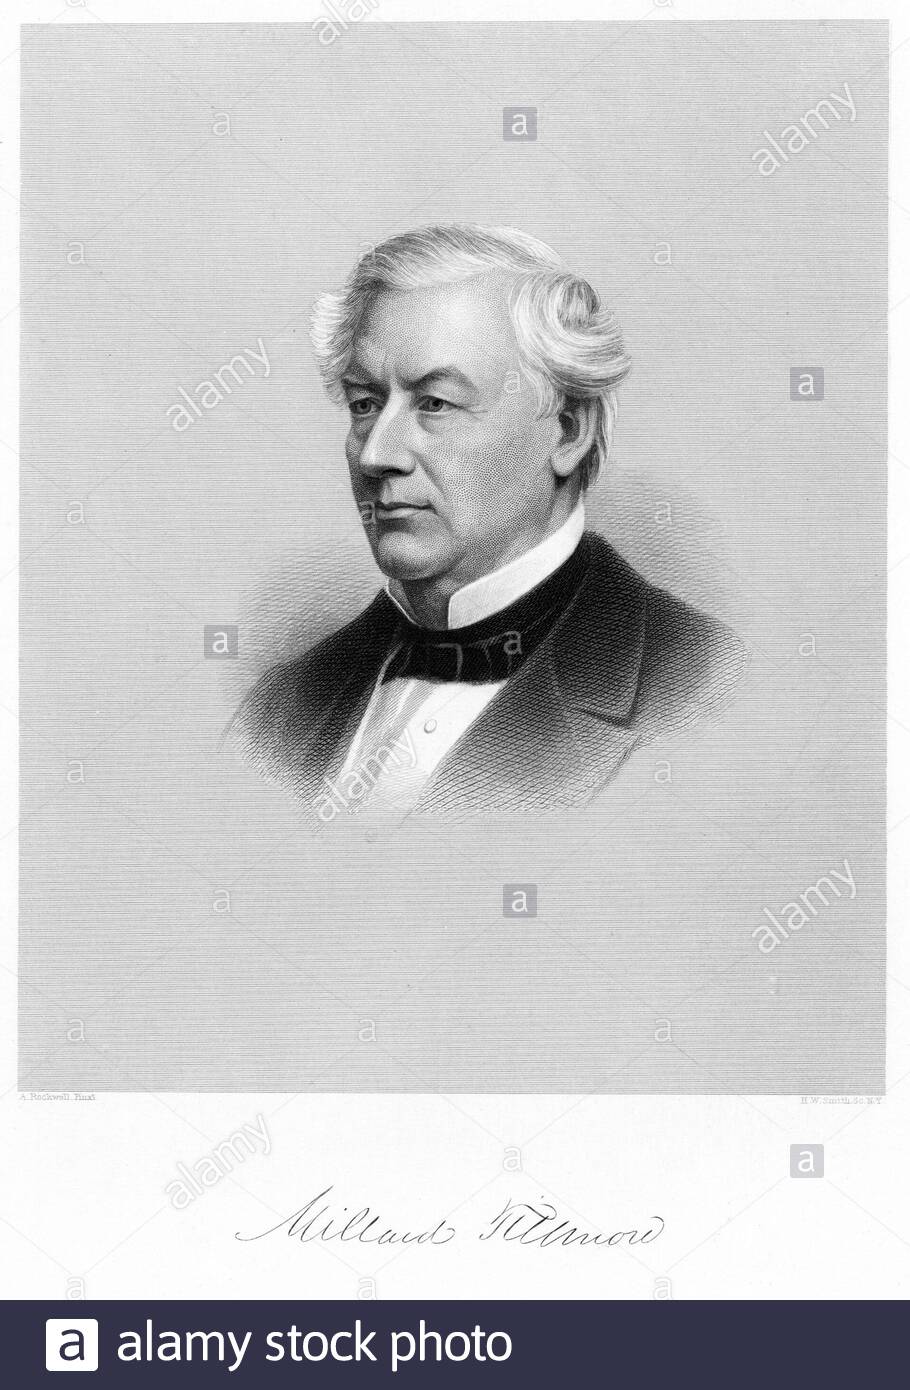 Millard Fillmore portrait, 1800 – 1874, was the 13th president of the United States, serving from 1850 to 1853,  vintage engraving from 1800s Stock Photo